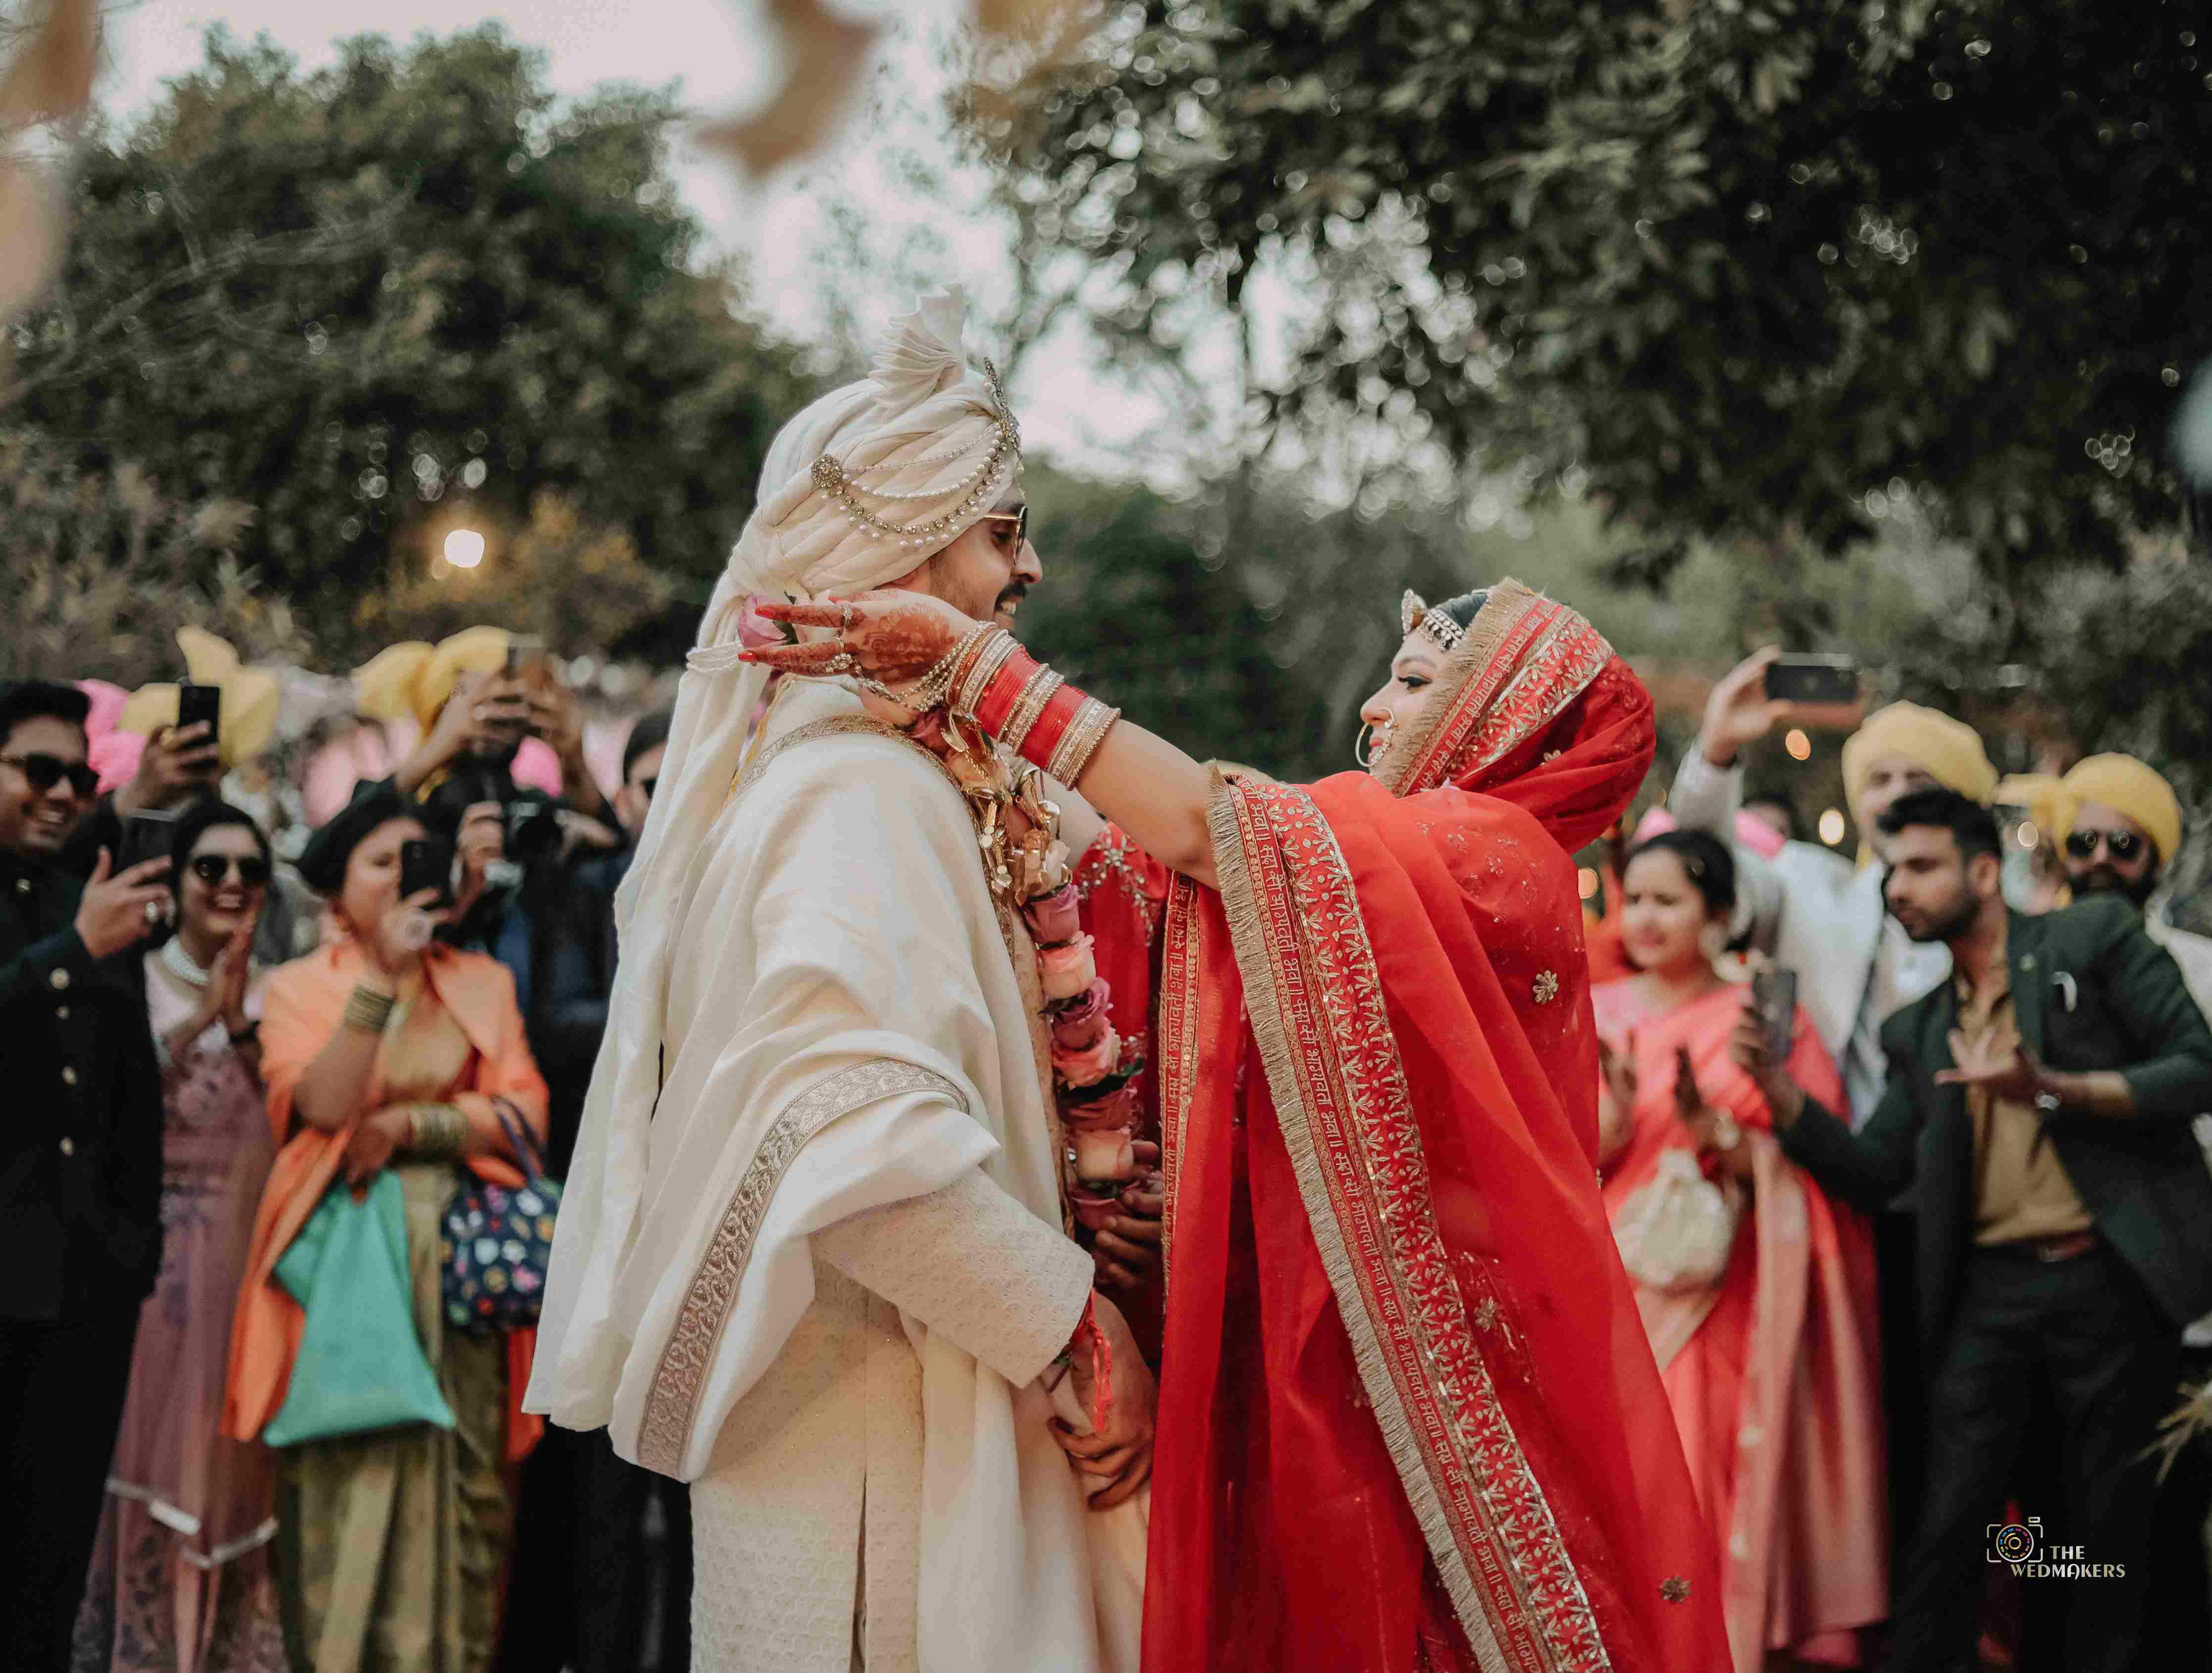 These College-Time Lovers Have The Quirkiest Wedding Pictures!